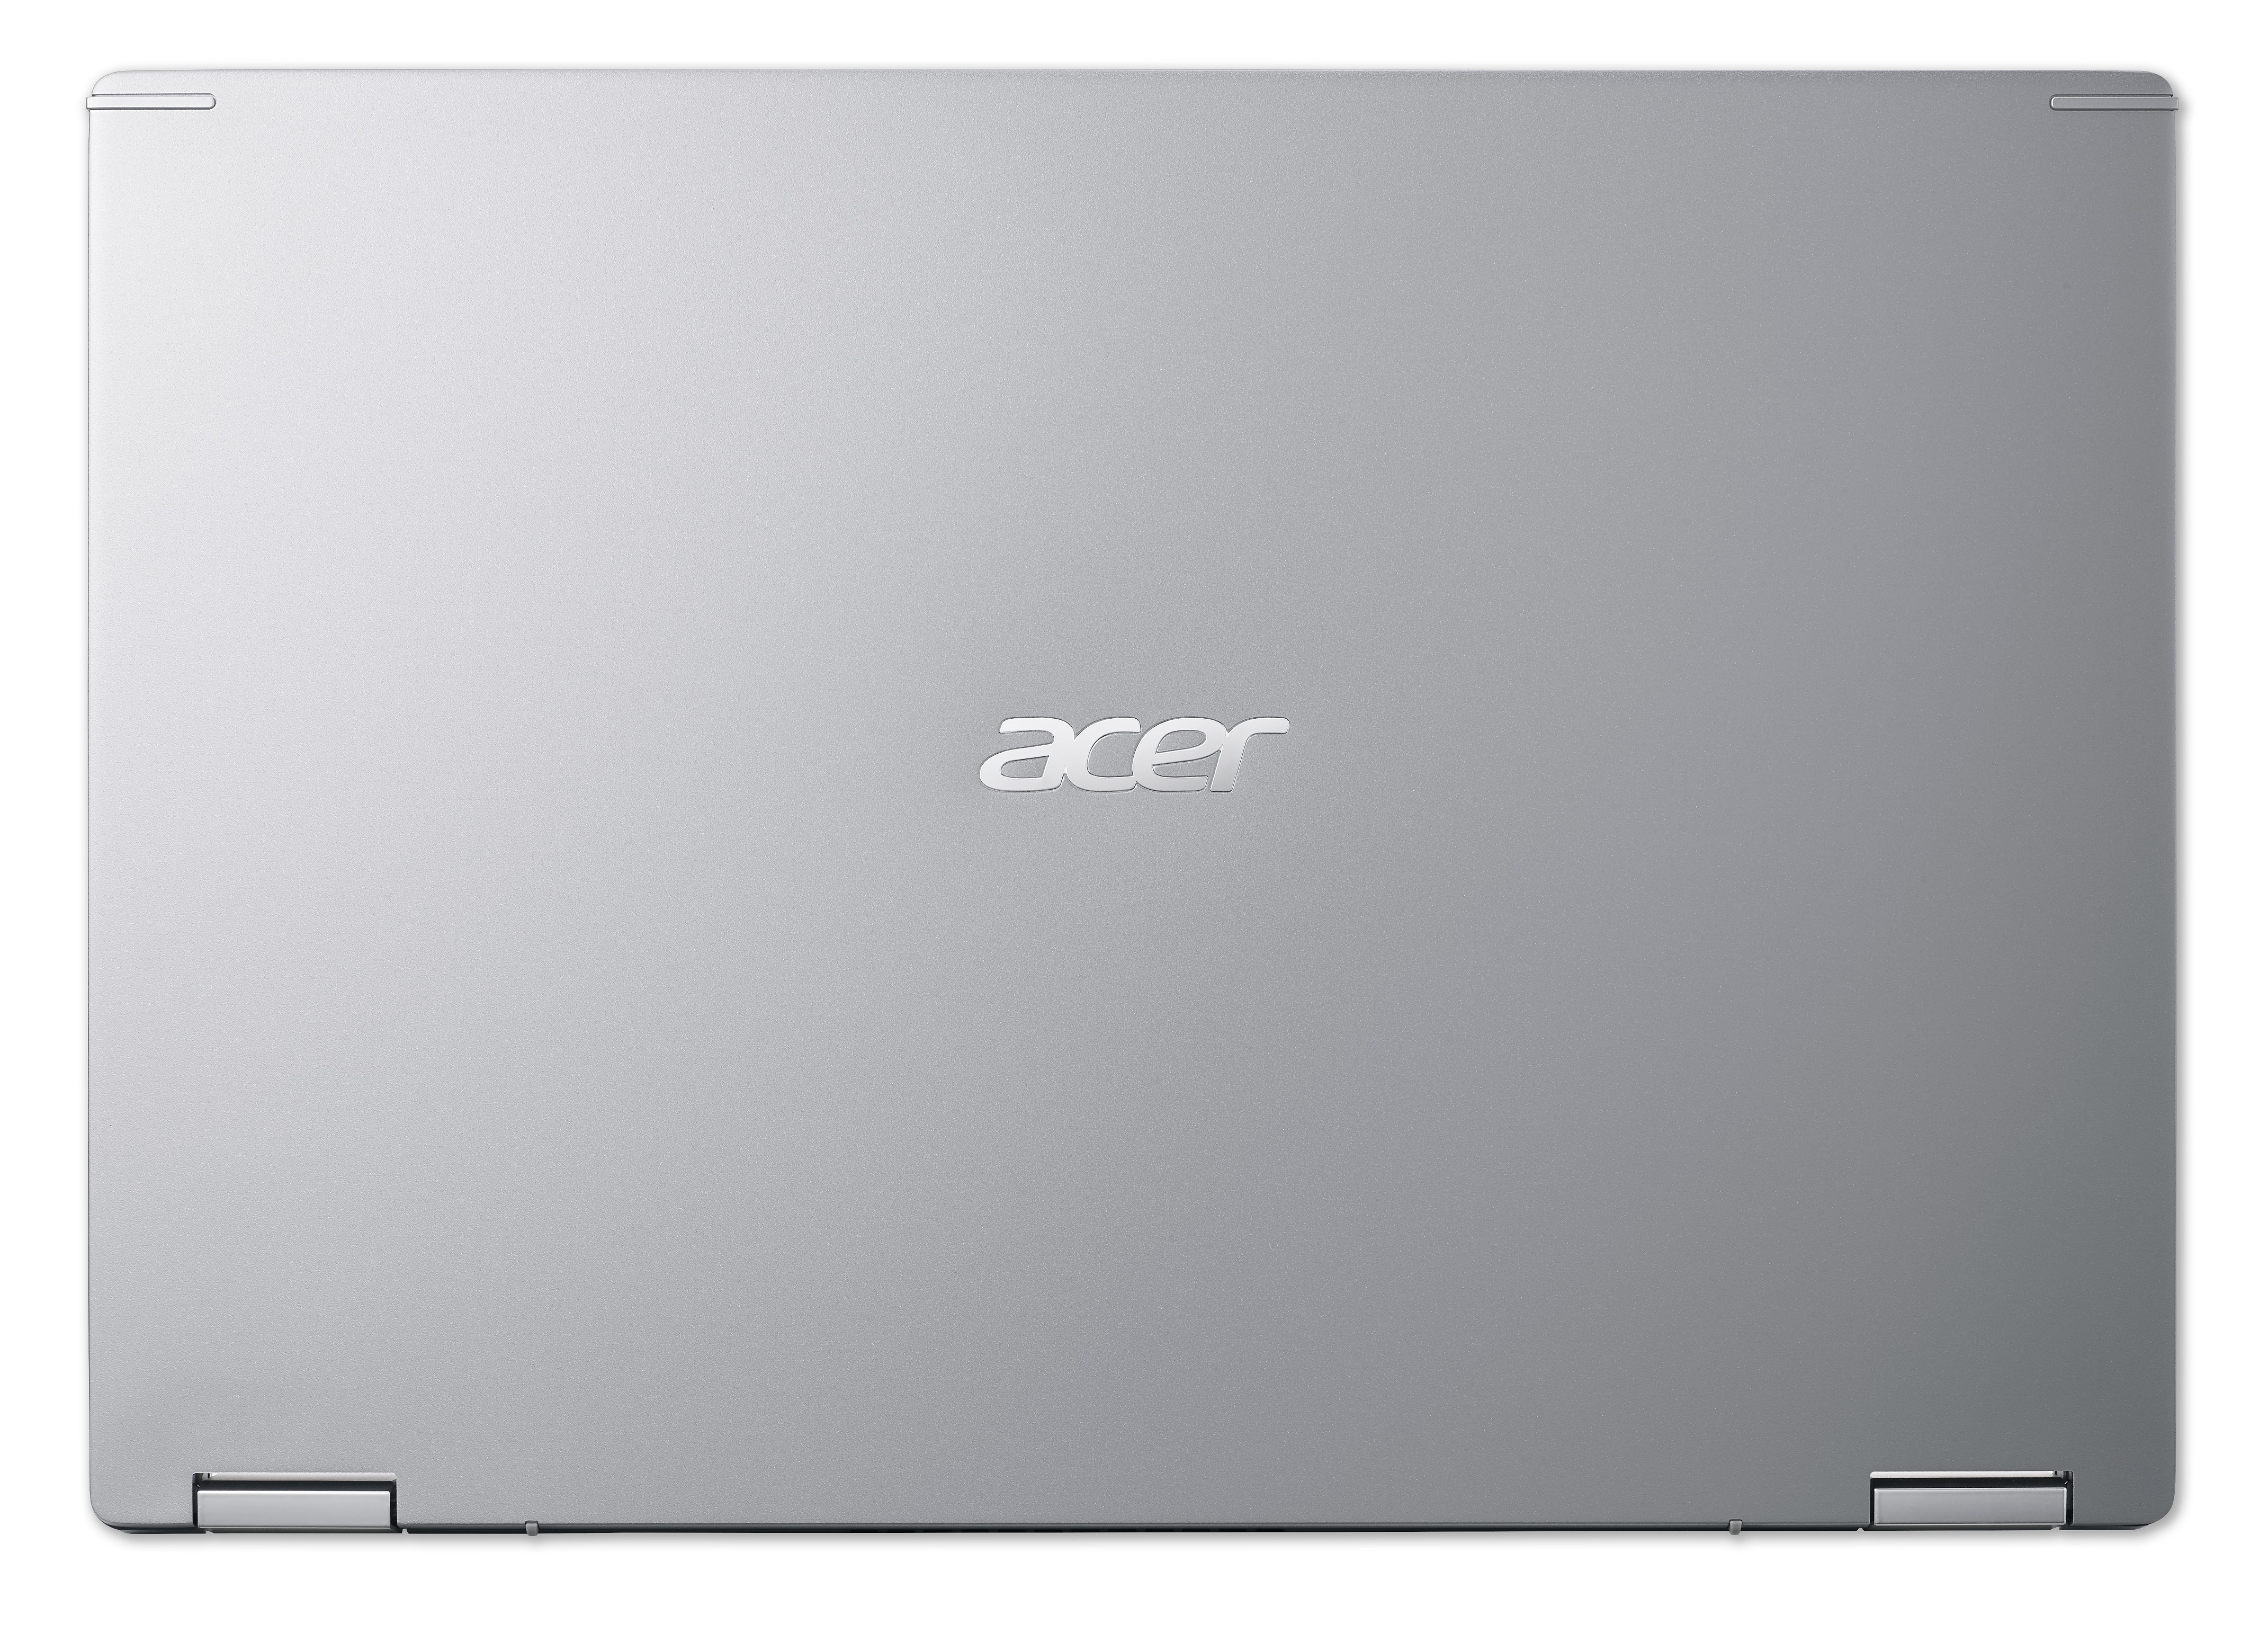 Acer Spin 3 Thin and Light Convertible 2-in-1, 14" HD Touch, AMD Ryzen 3 3250U Dual-Core Mobile Processor with Radeon Graphics, 4GB DDR4, 128GB NVMe SSD, Windows 10 in S mode, SP314-21-R56W - image 5 of 8